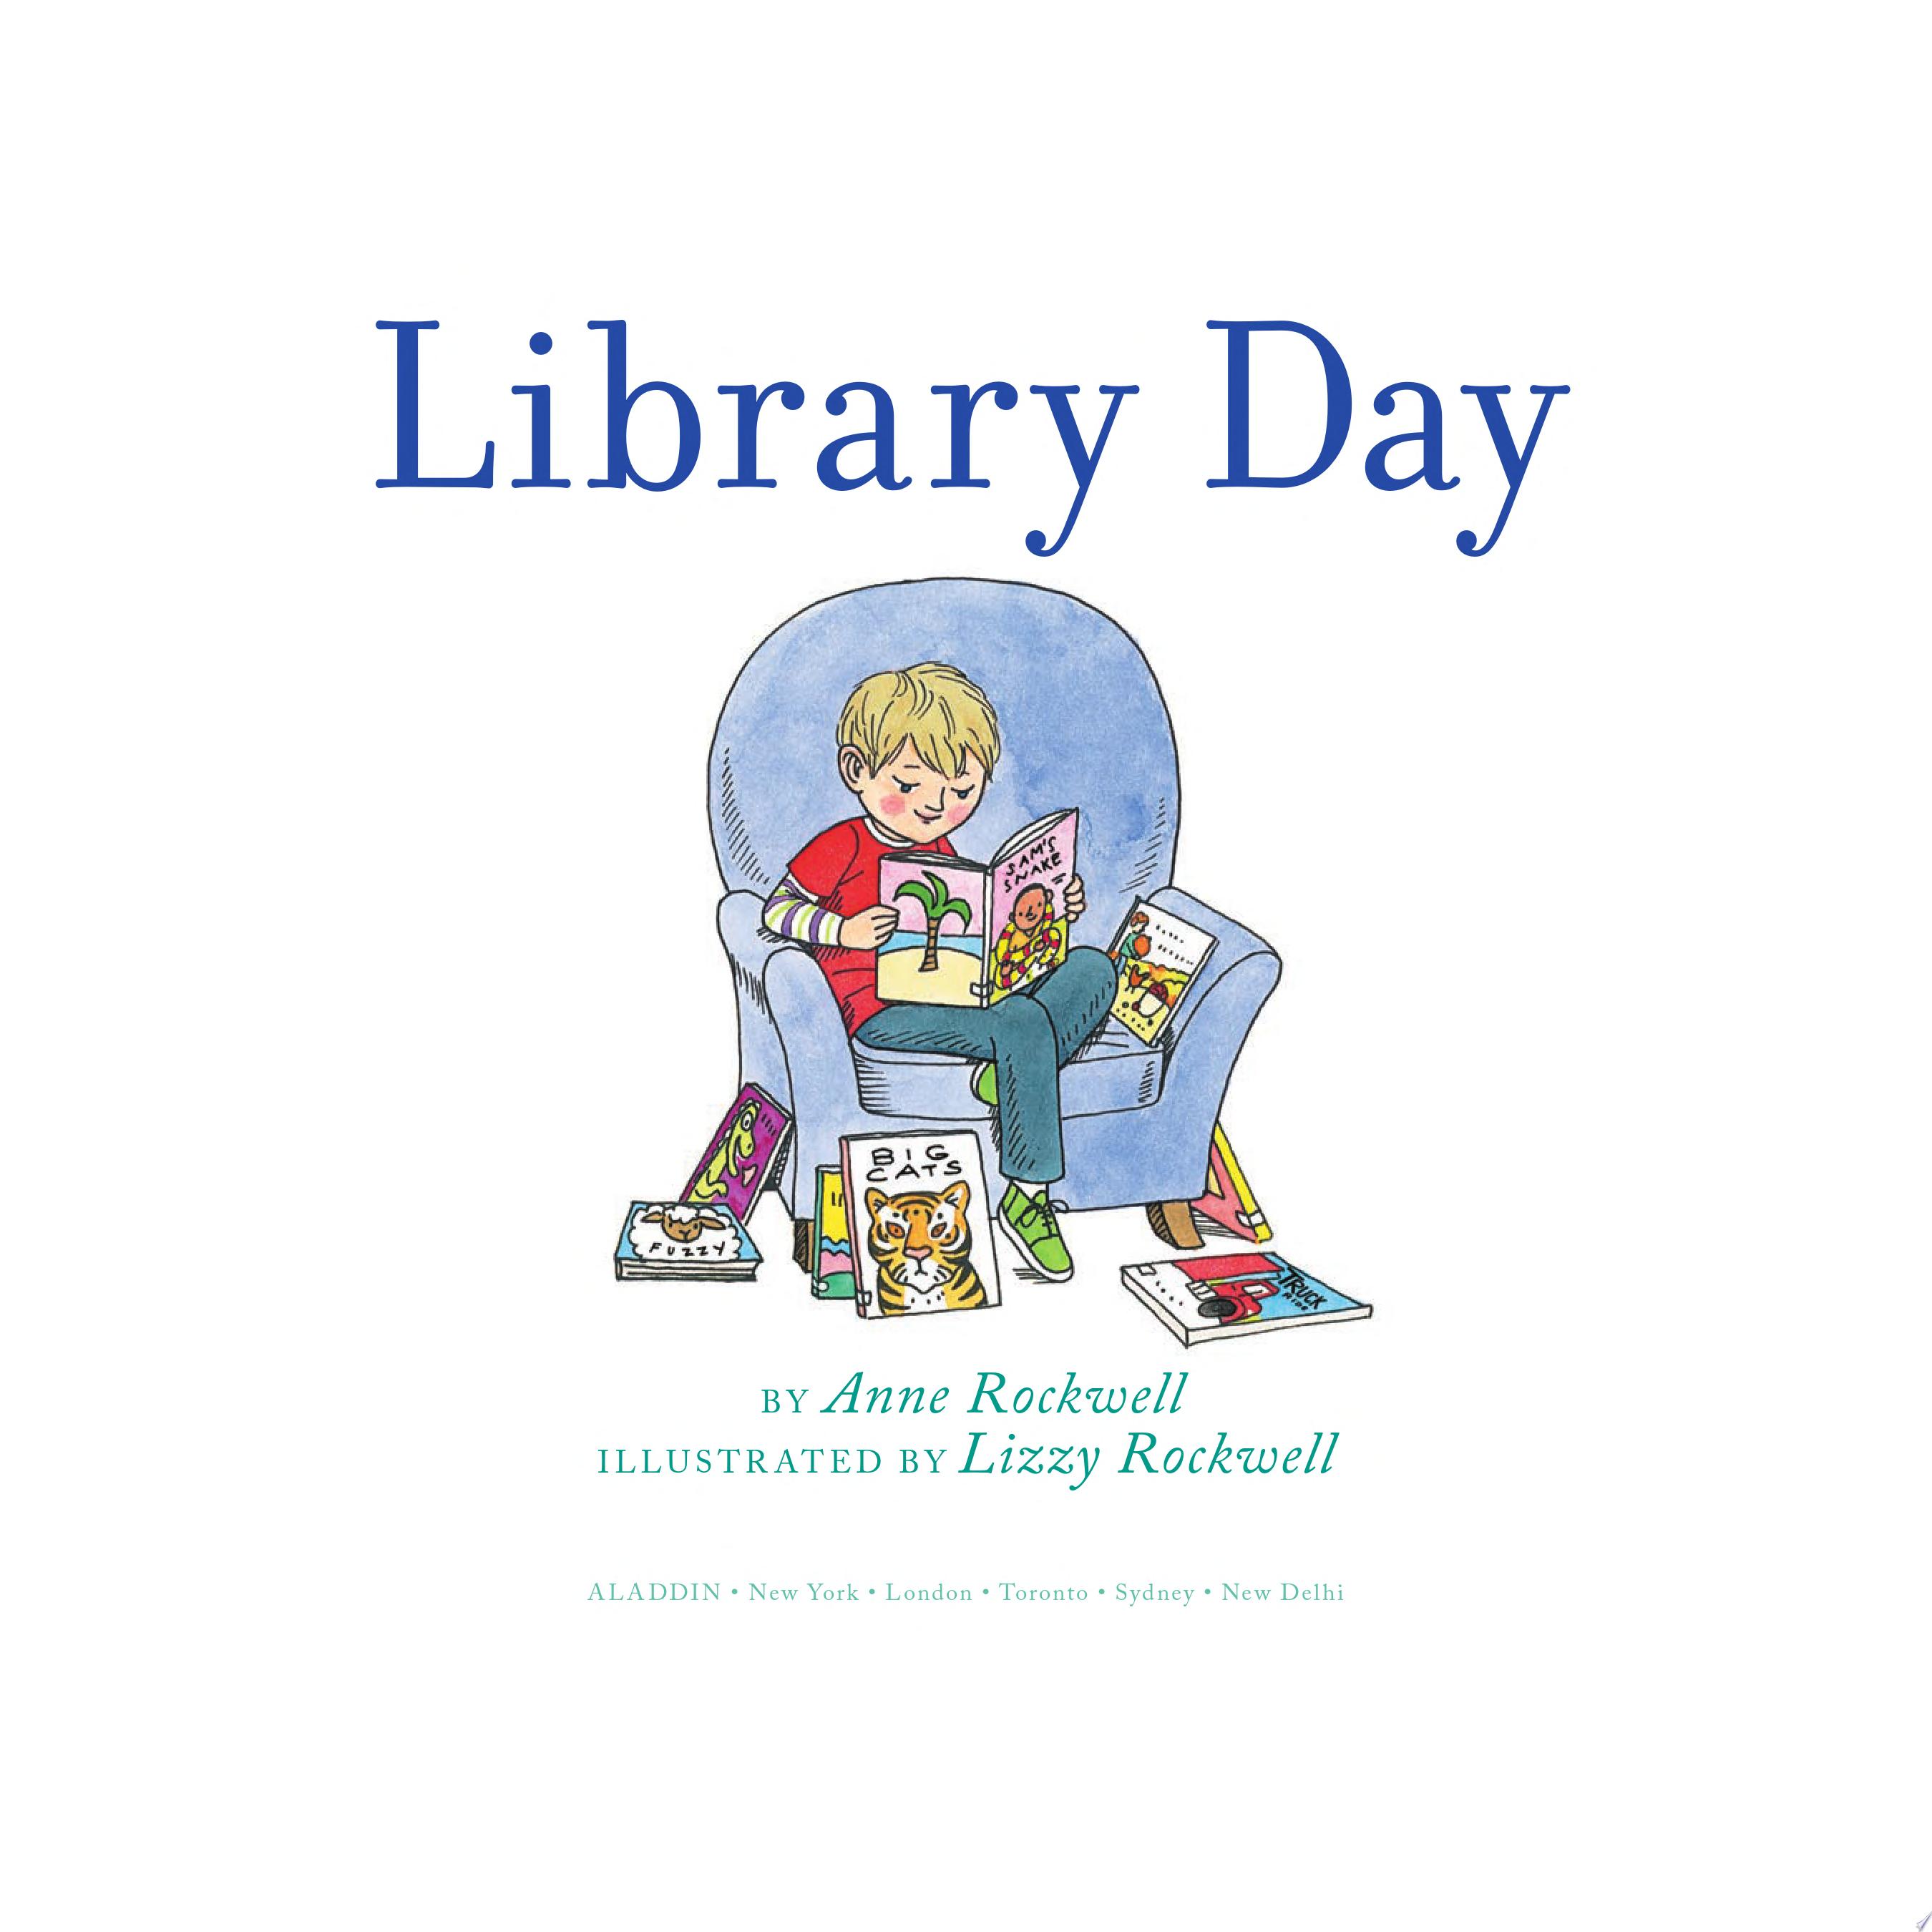 Image for "Library Day"